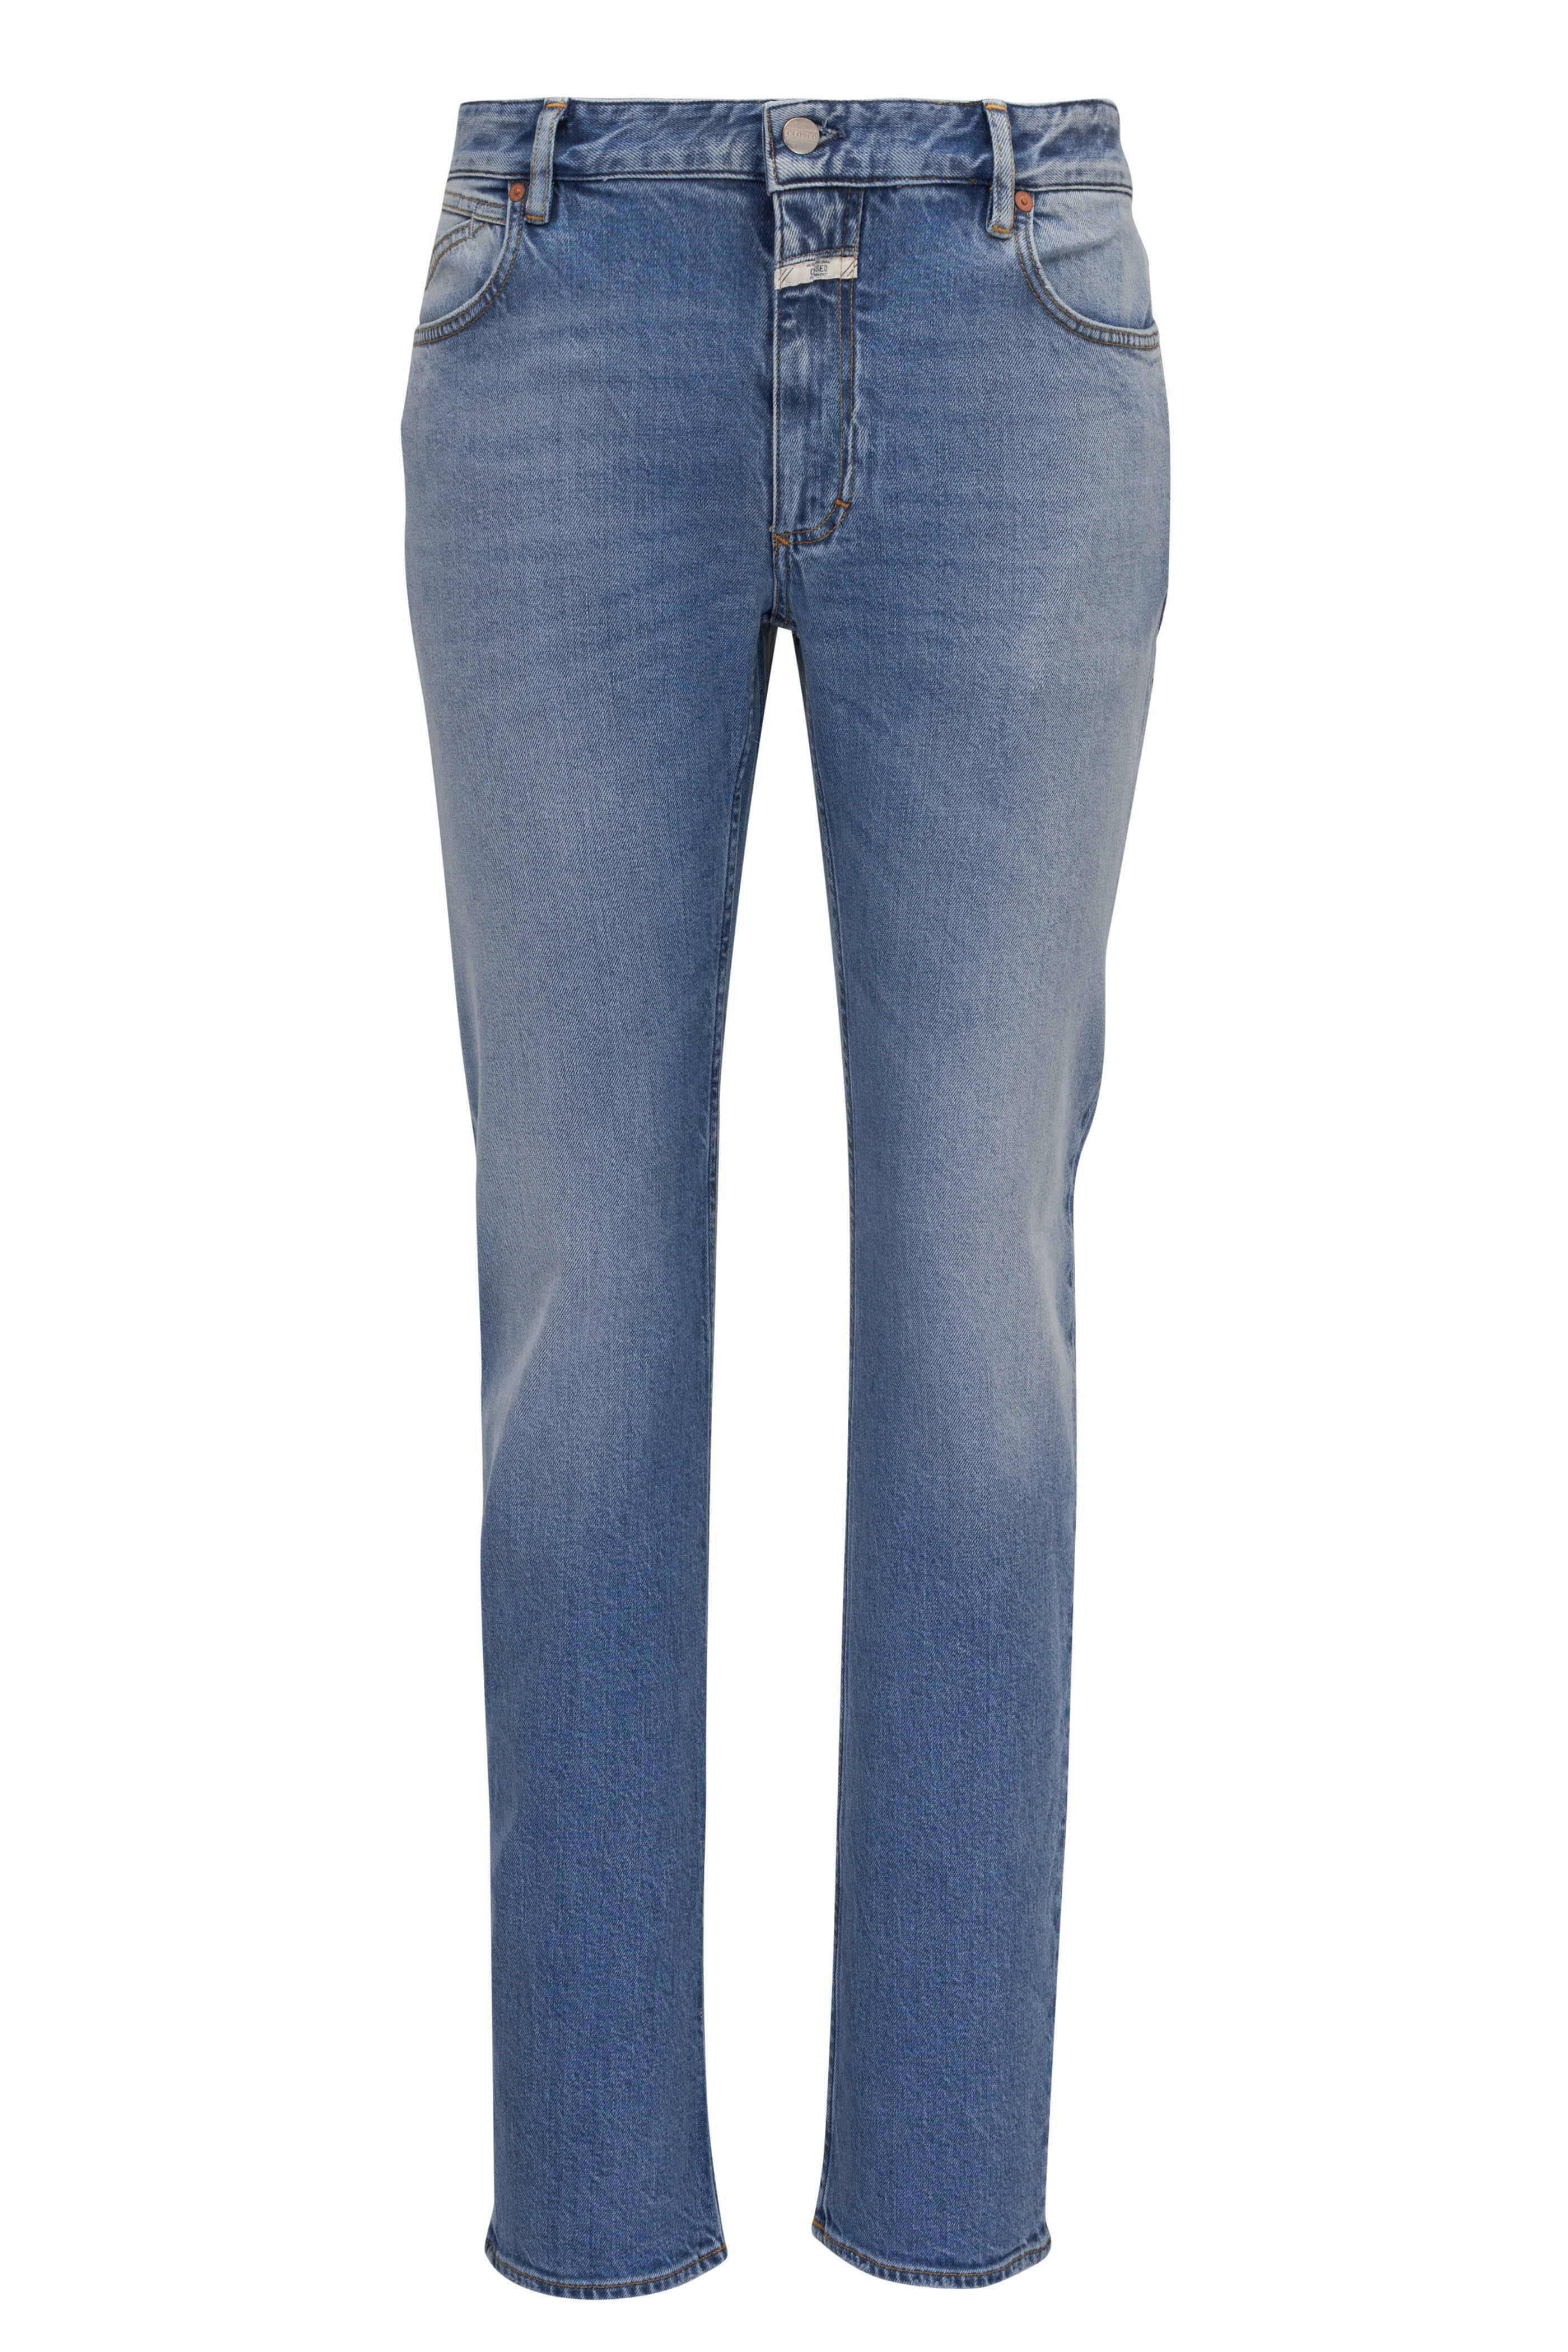 Closed - Unity Light Blue Five Pocket Jean | Mitchell Stores